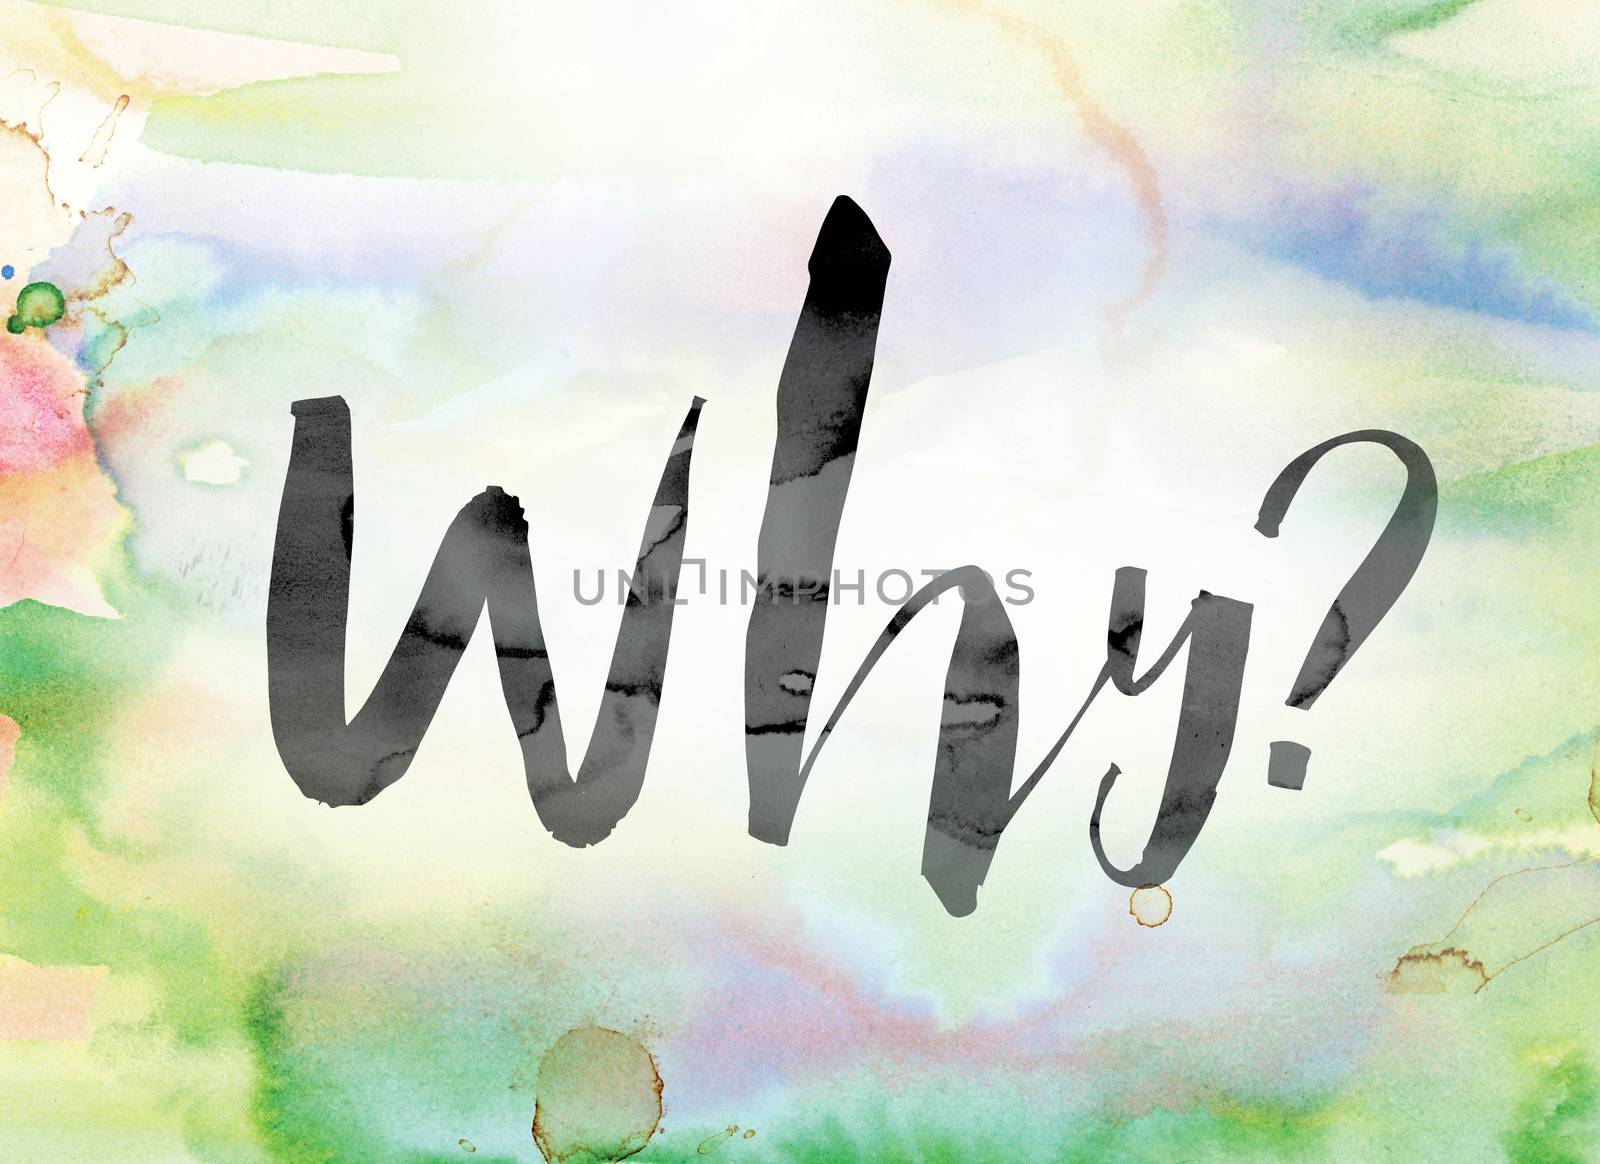 The word "Why" painted in black ink over a colorful watercolor washed background concept and theme.